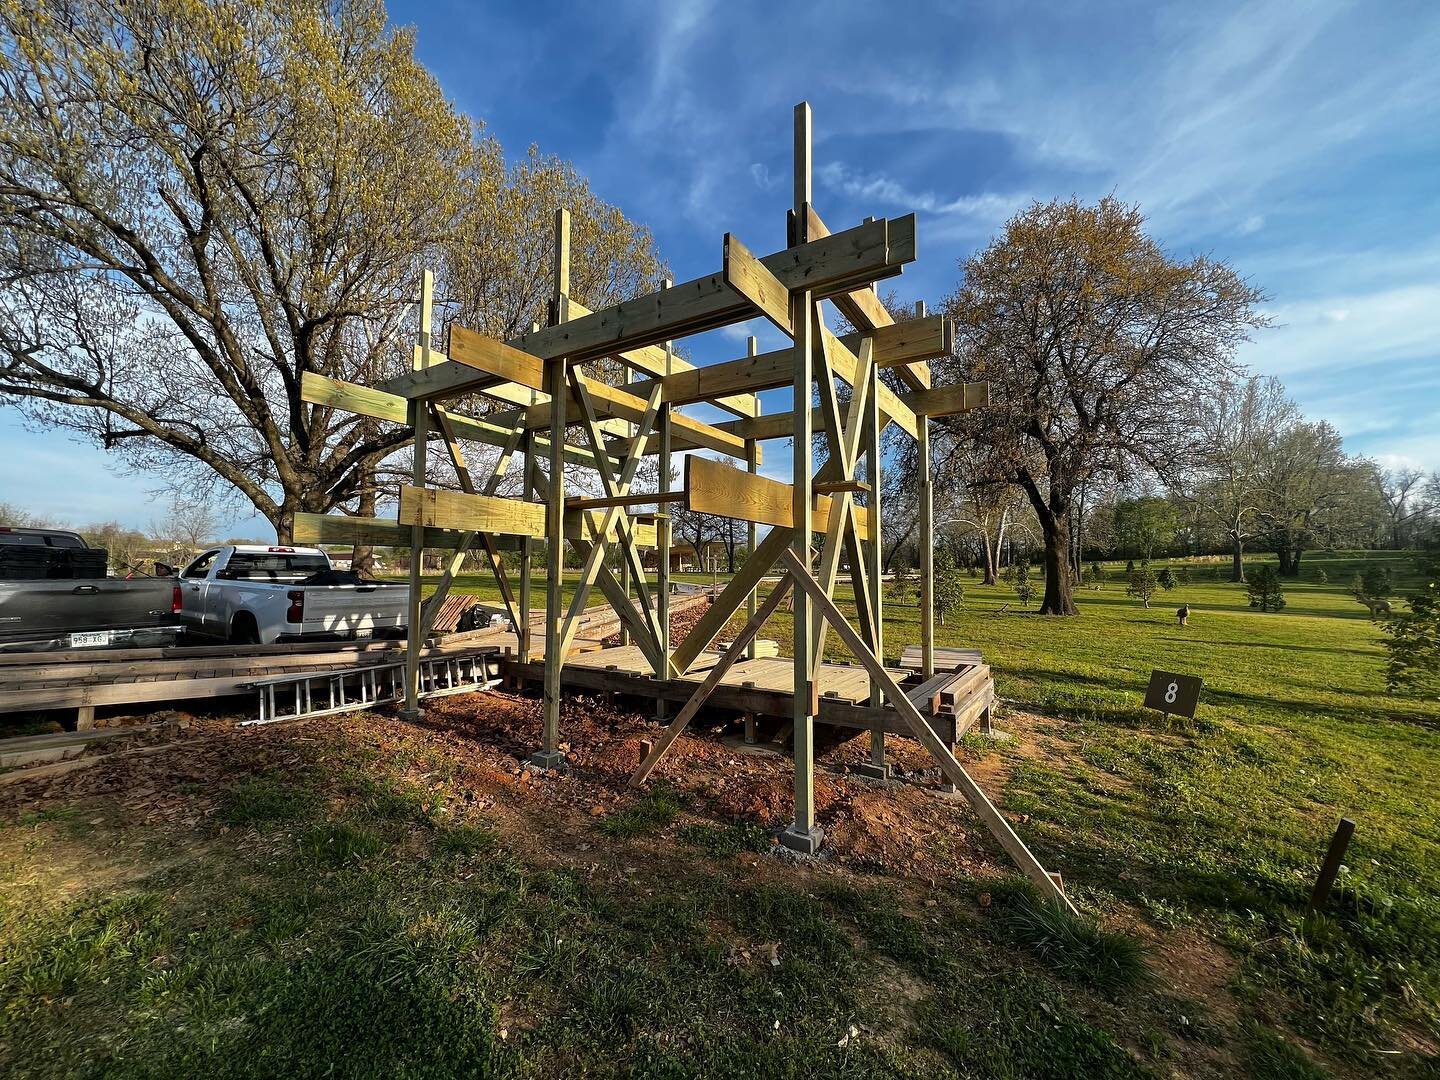 Building an elevated archery platform for @arkansasgameandfish at the always beautiful JB and Johnelle Hunt Nature Center.
.
📷 Jimbo